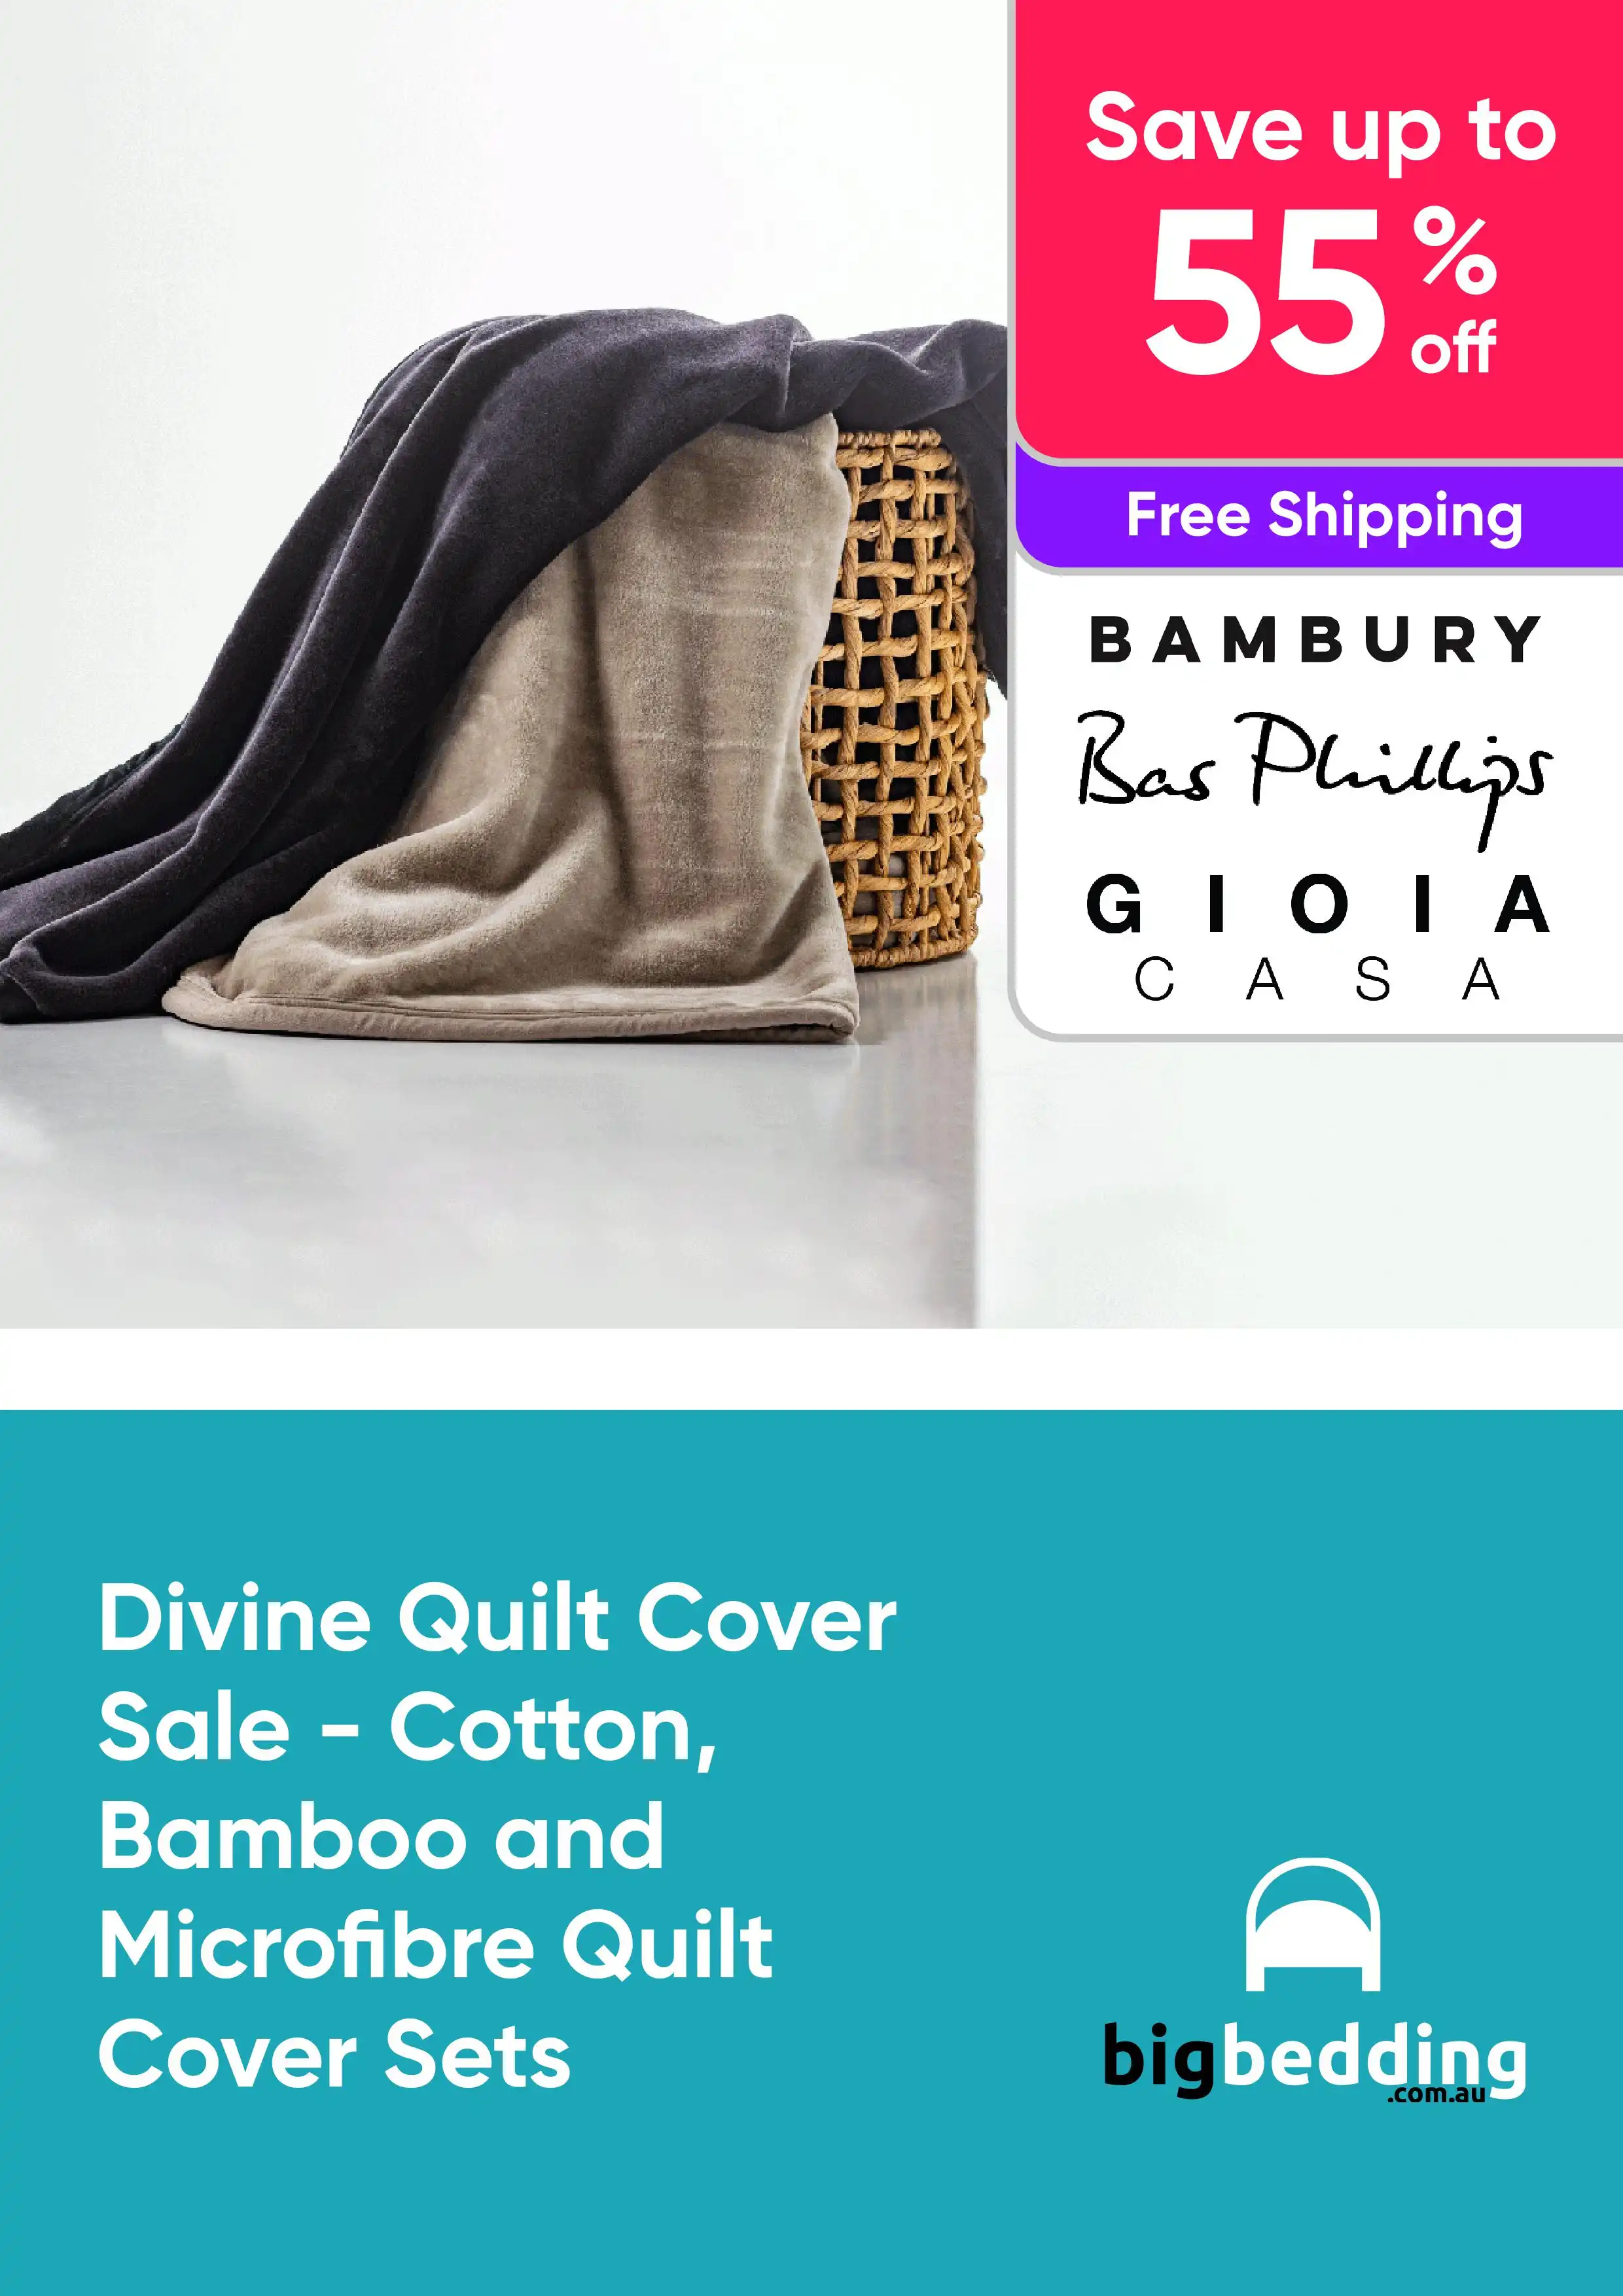 Divine Quilt Cover Sale - Shop and Save on Cotton, Bamboo and Microfibre Quilt Cover Sets